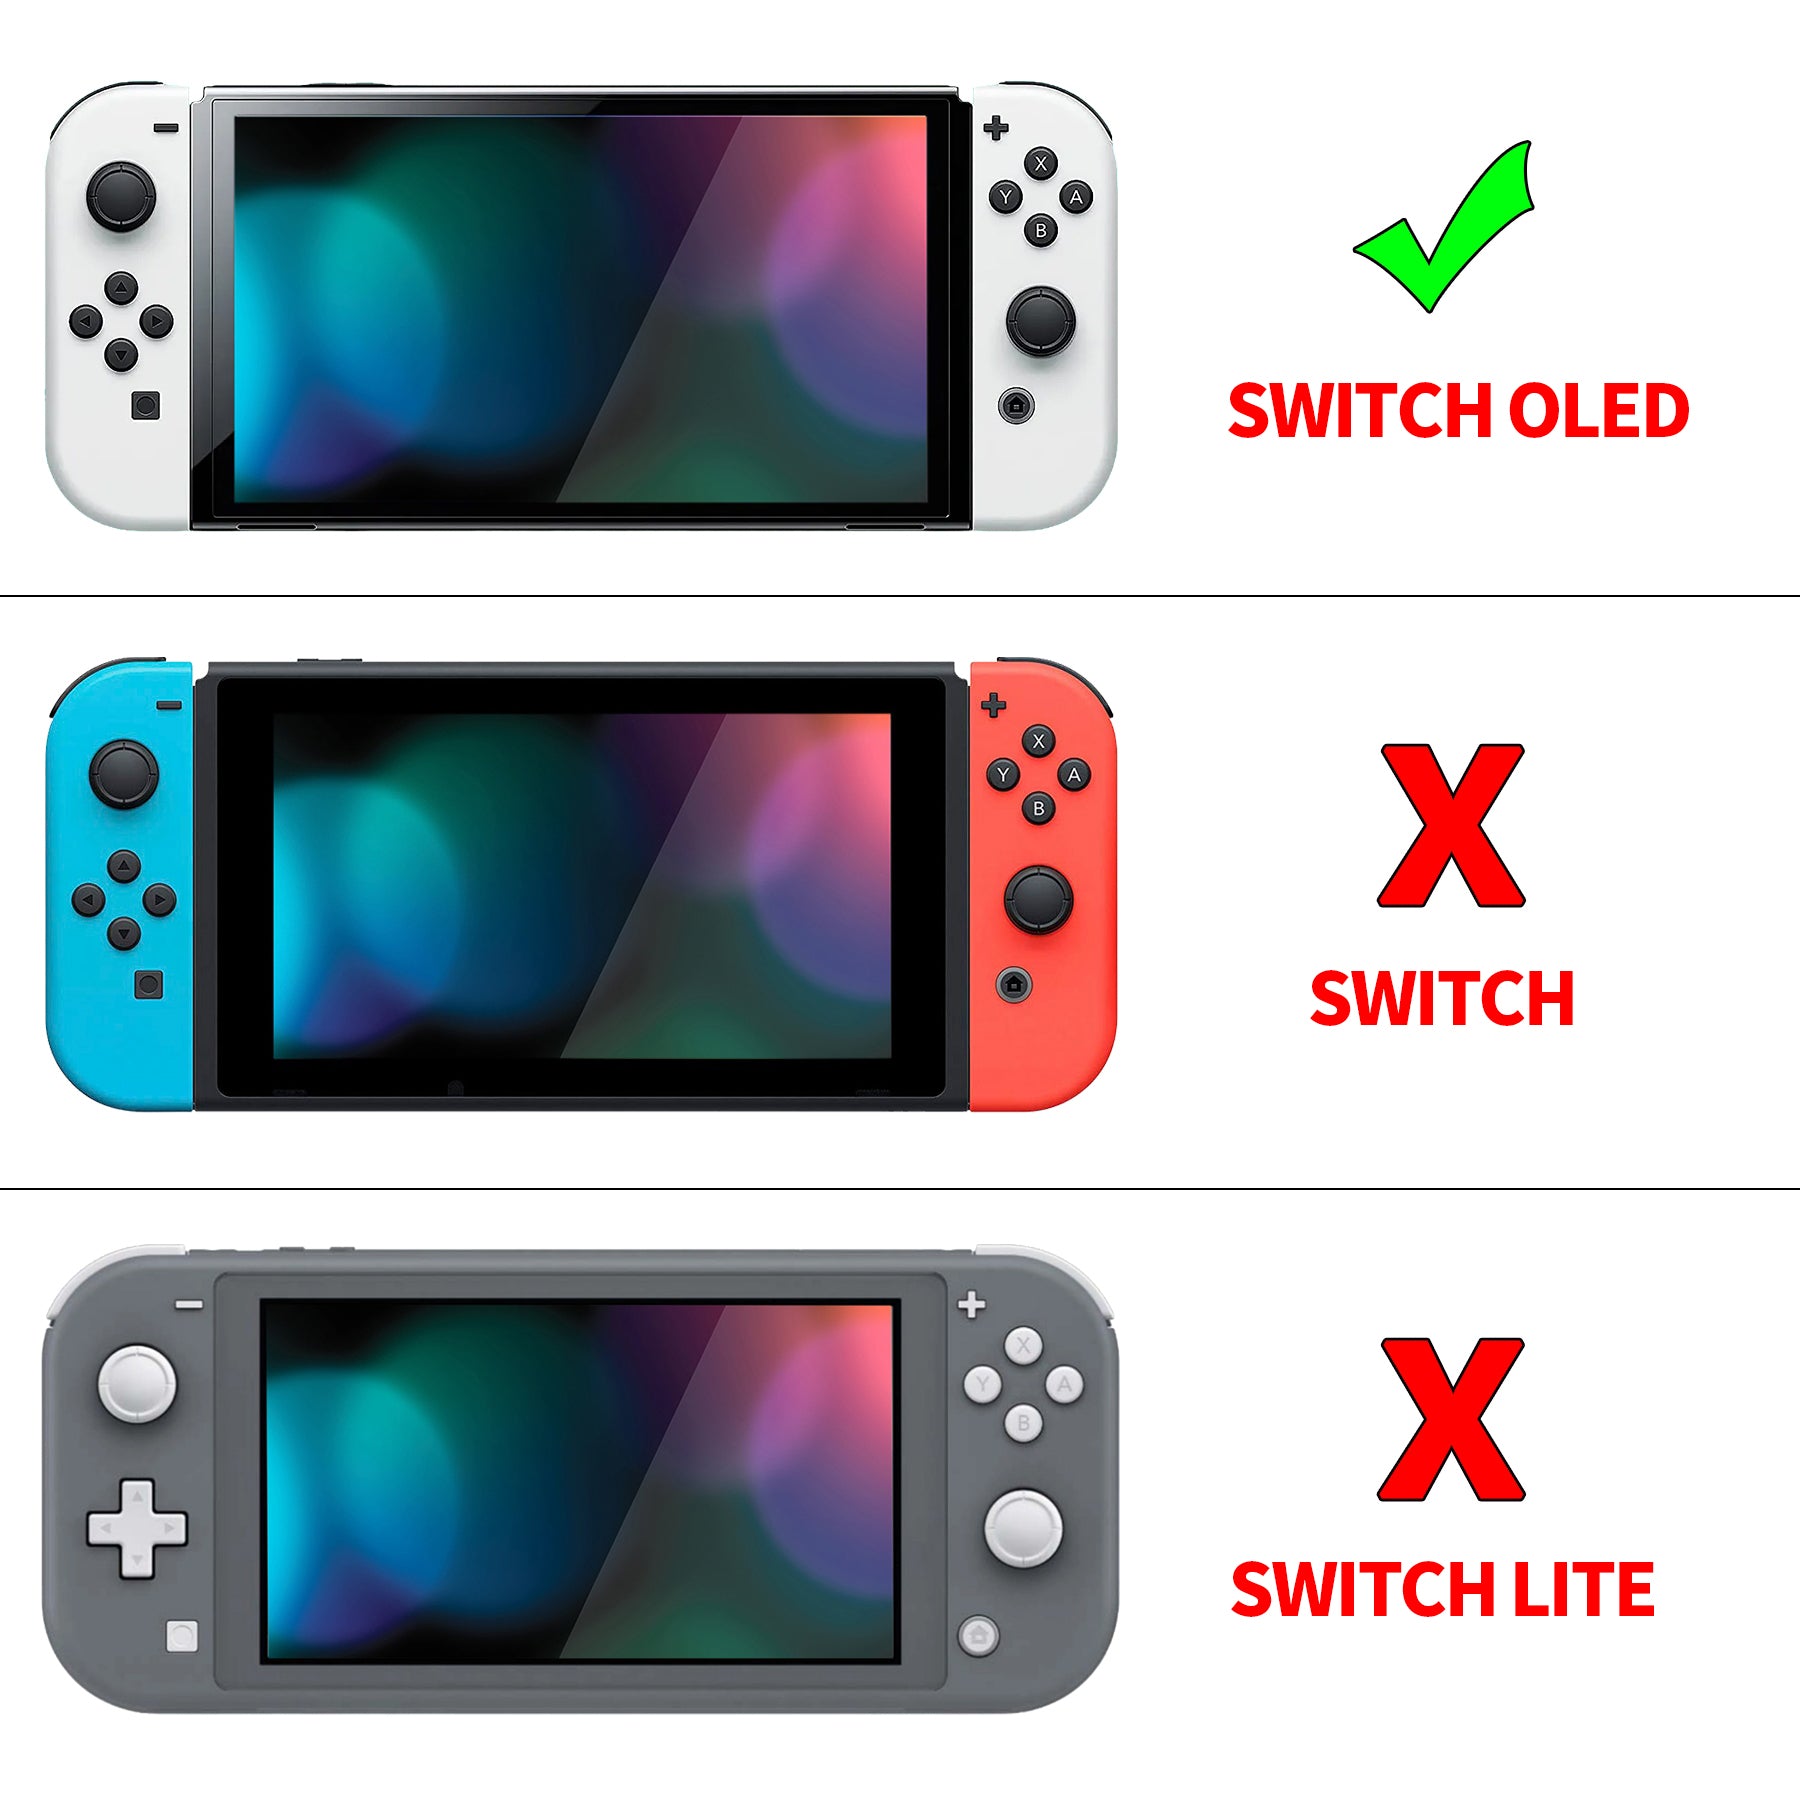 PlayVital ZealProtect Soft Protective Case for Switch OLED, Flexible Protector Joycon Grip Cover for Switch OLED with Thumb Grip Caps & ABXY Direction Button Caps - Sweet Time - XSOYV6027 playvital